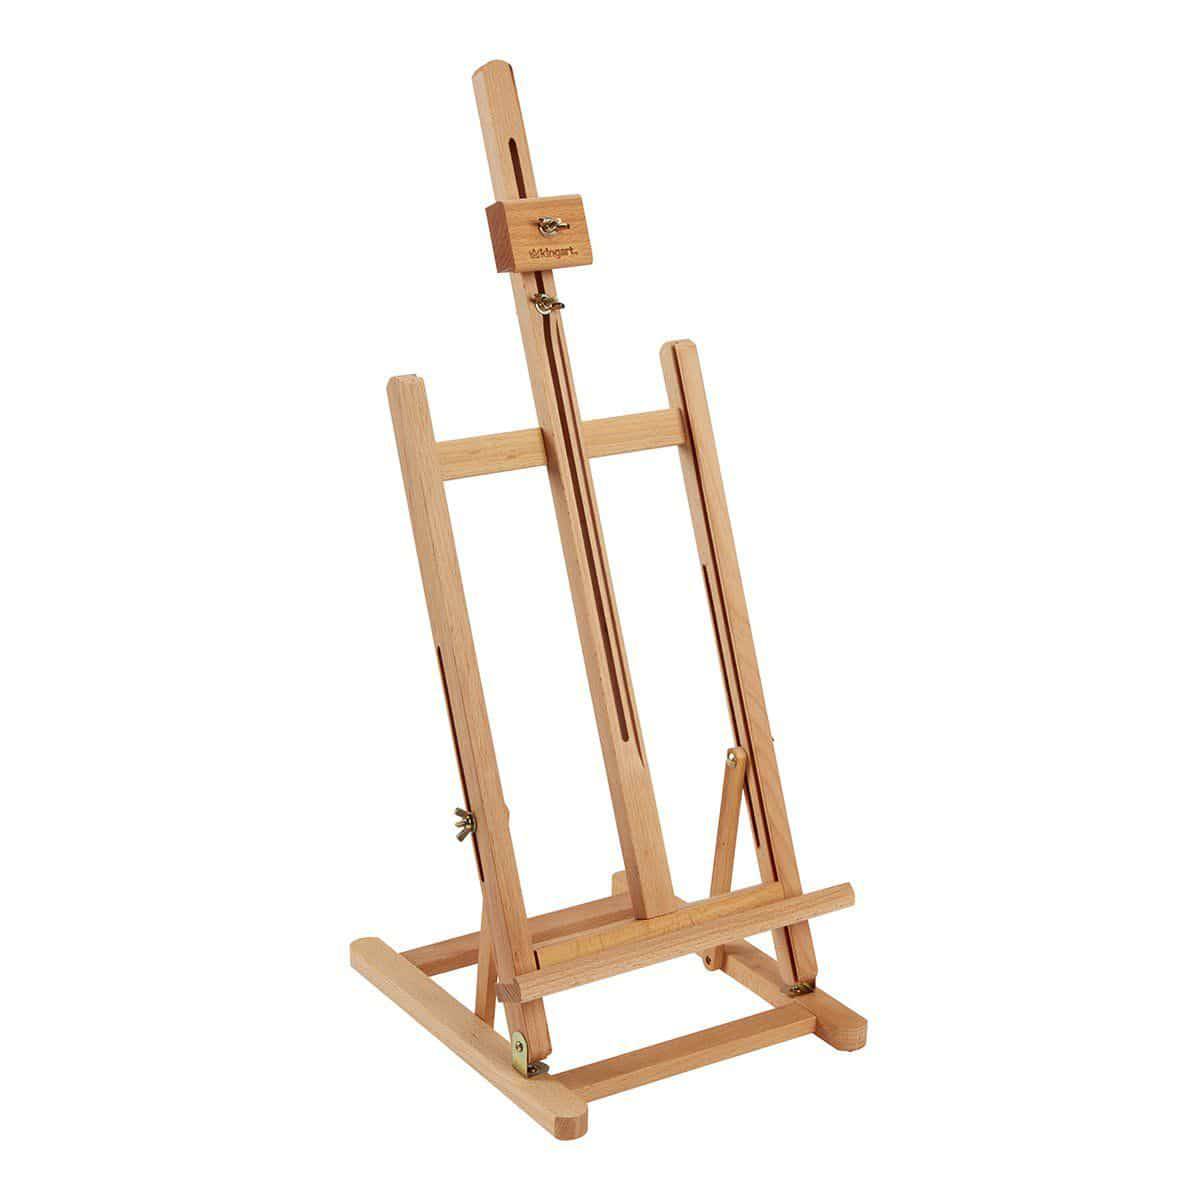 Painting easel for on the table made from cardboard - KarTent webshop